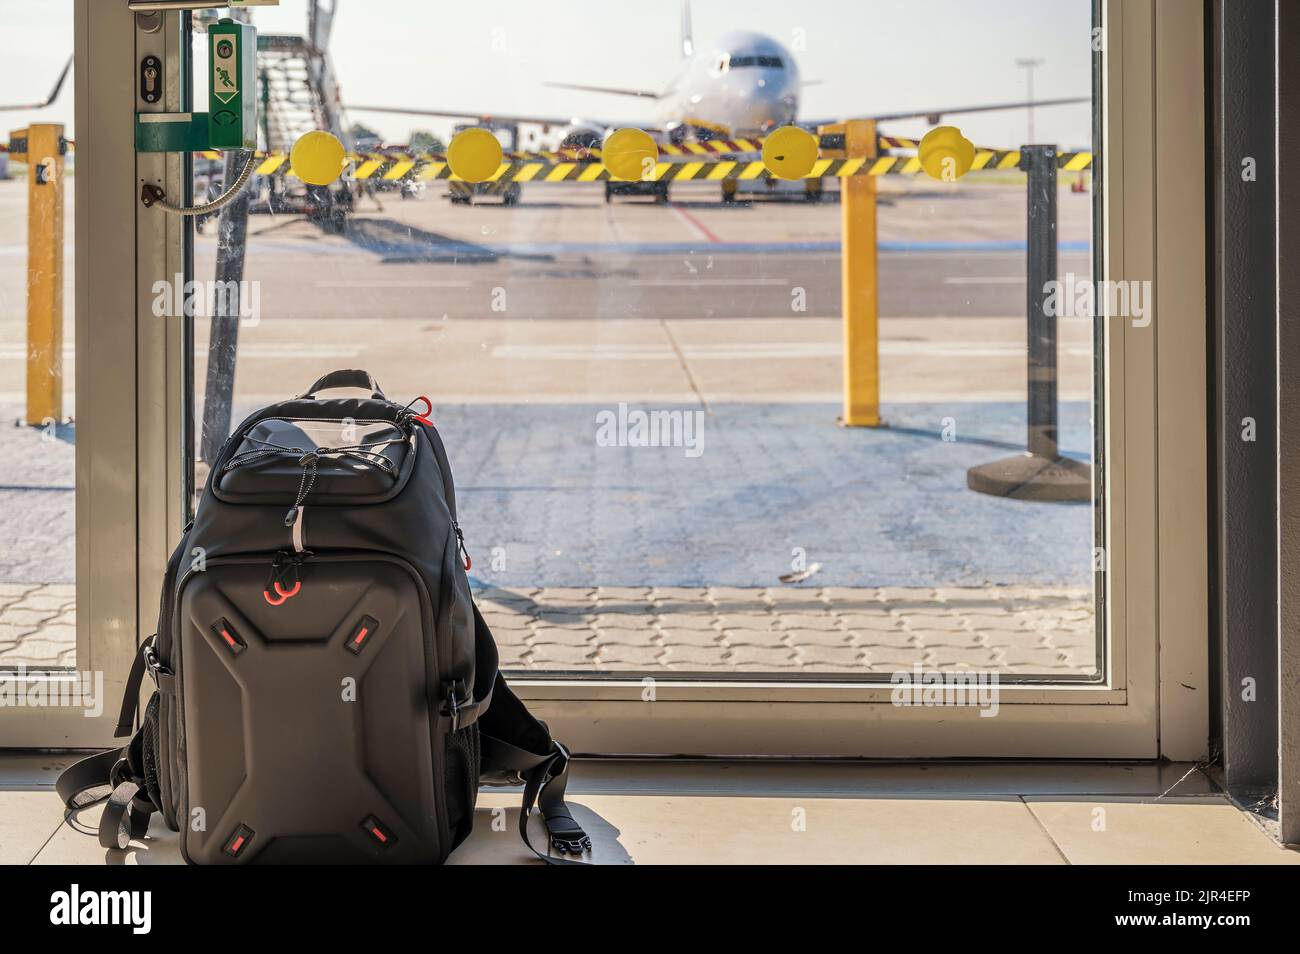 Hand luggage at the airport in front of an airplane as a symbol for baggage regulations Stock Photo